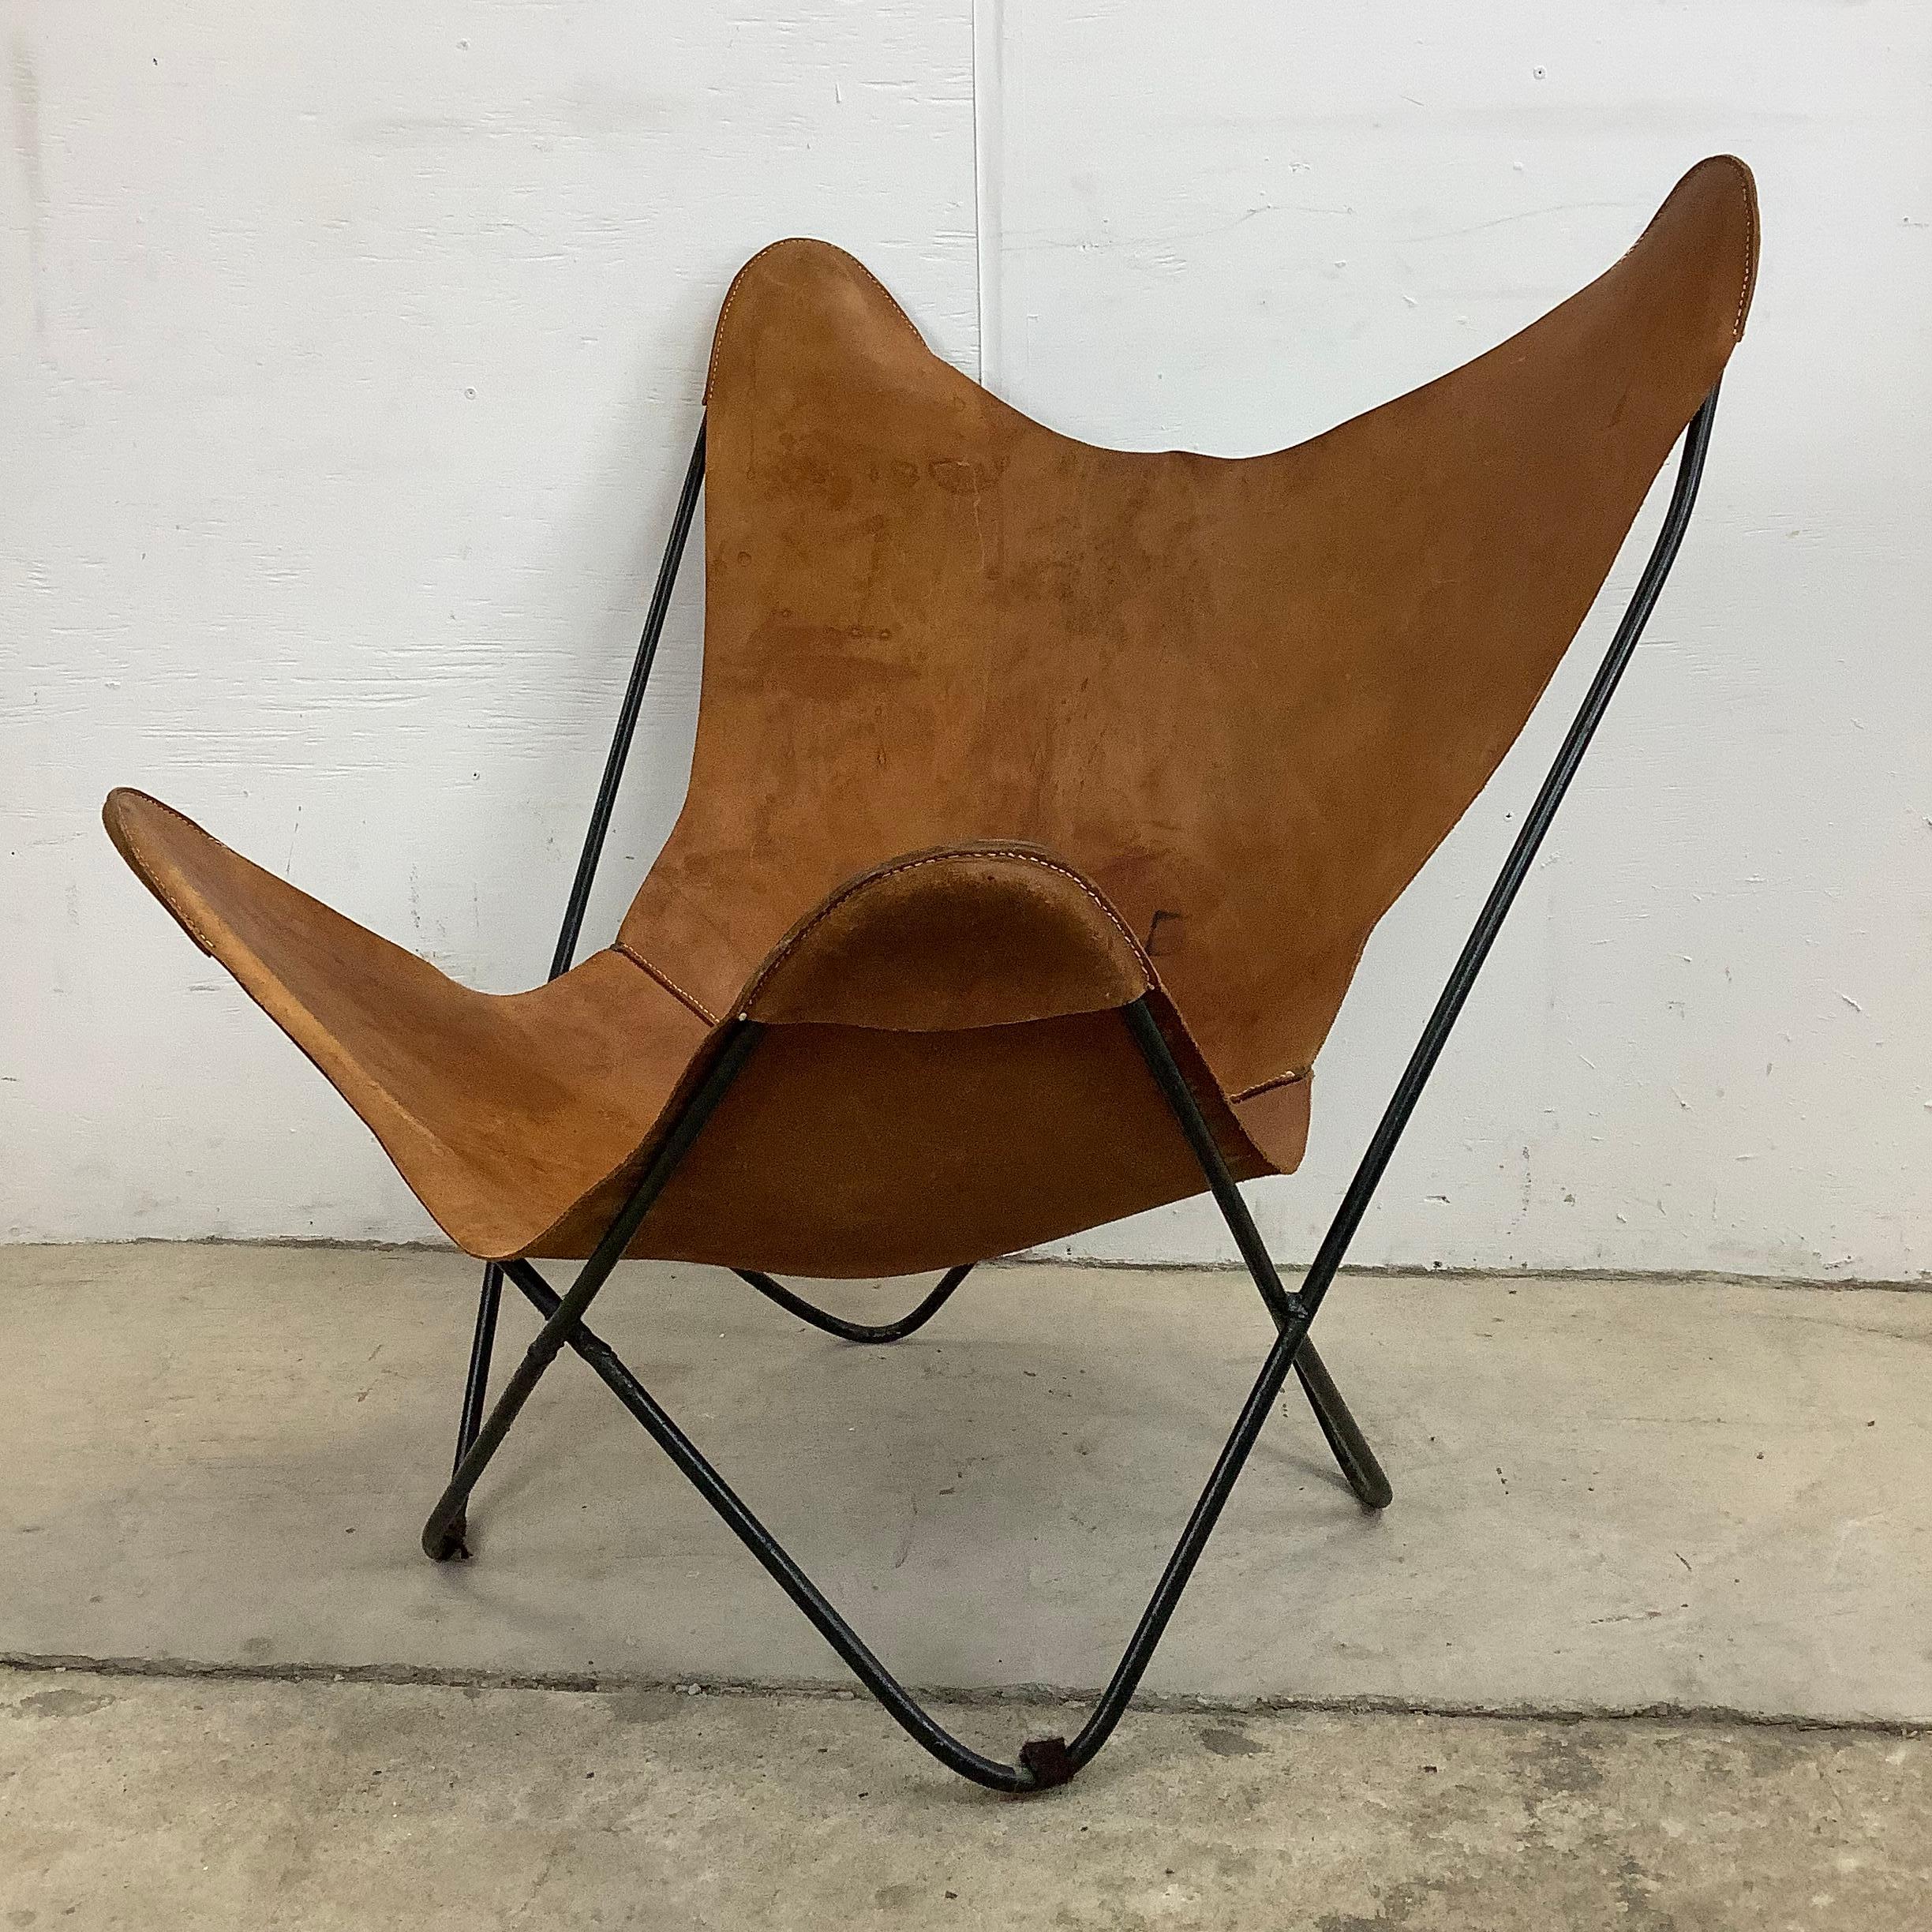 Mid-20th Century Vintage Modern Butterfly Chair With Iron Frame And Leather Seat